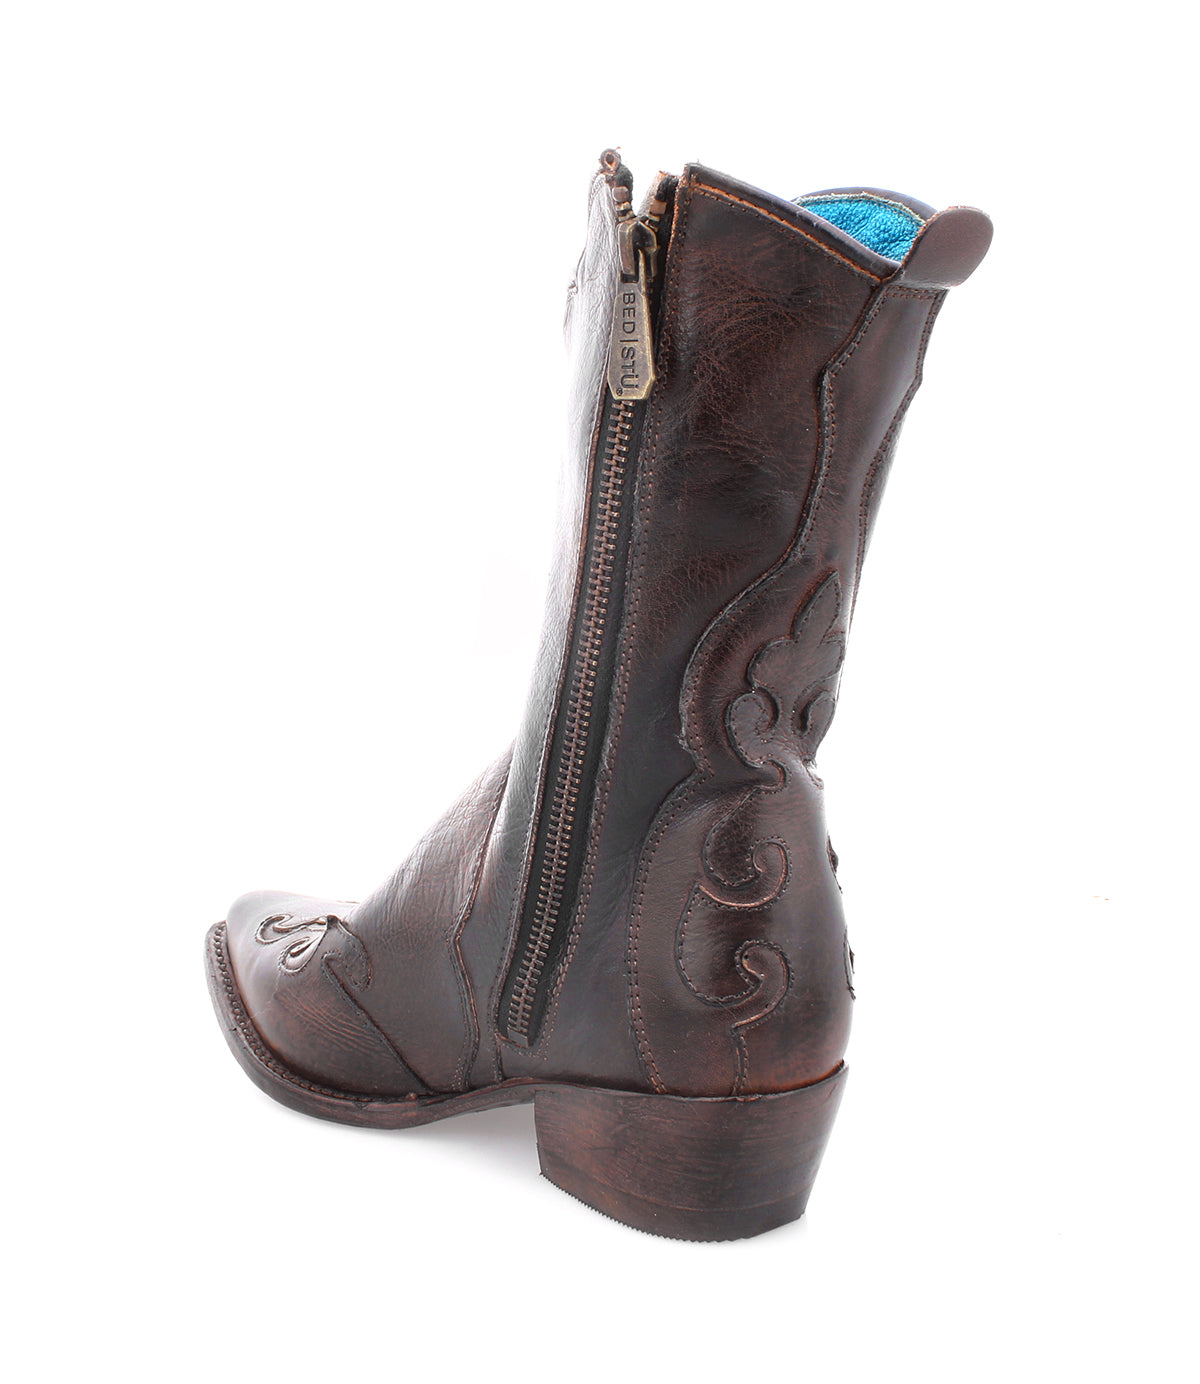 A western style Deuce women's brown cowboy boot with a zipper on the side from Bed Stu.